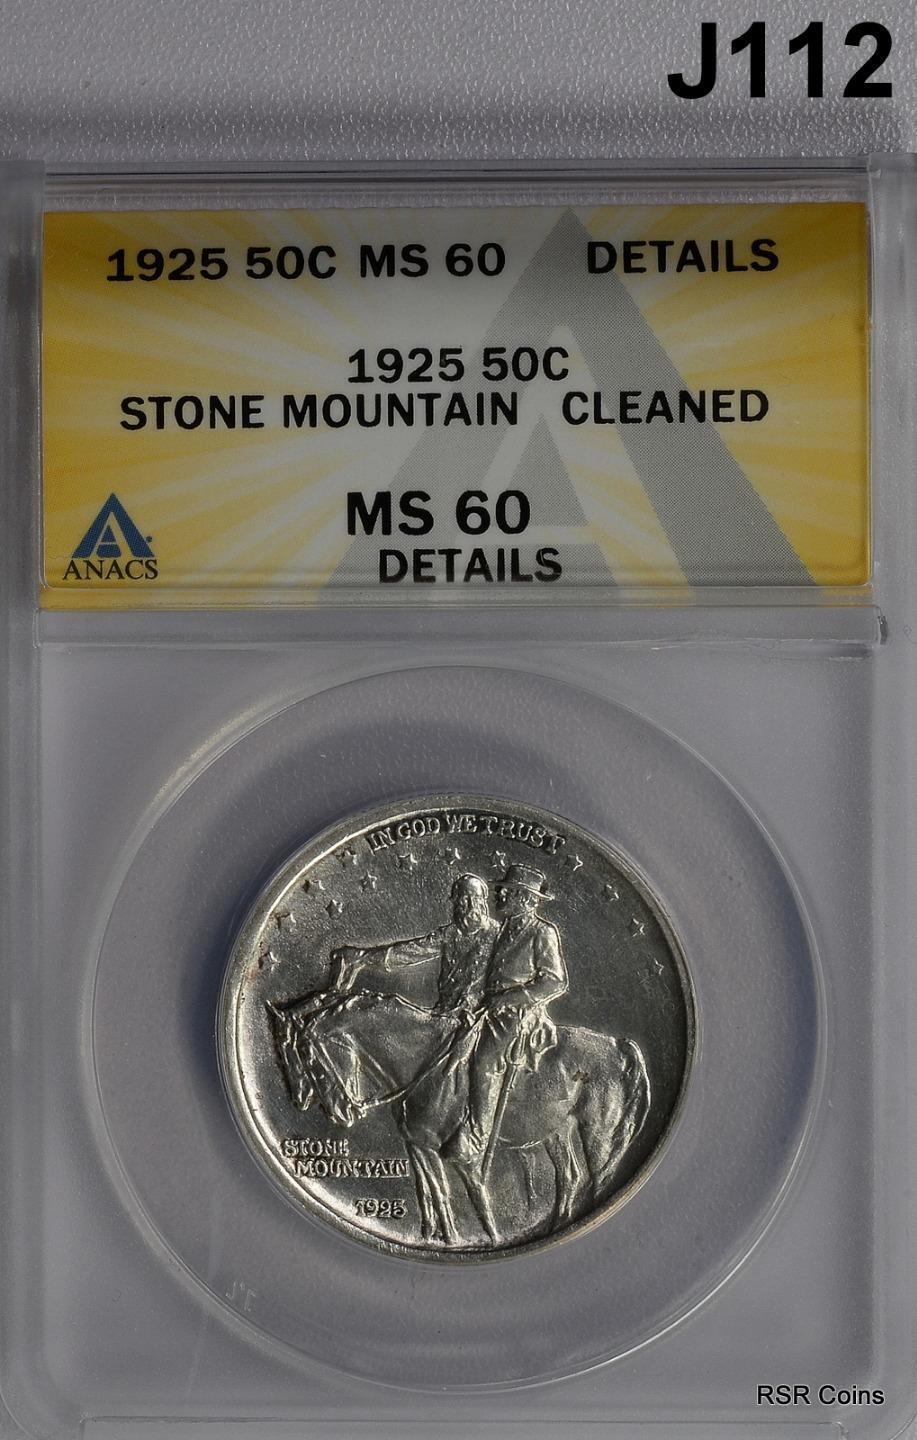 1925 STONE MOUNTAIN COMMEMORATIVE HALF ANACS CERTIFIED MS60 CLEANED #J112